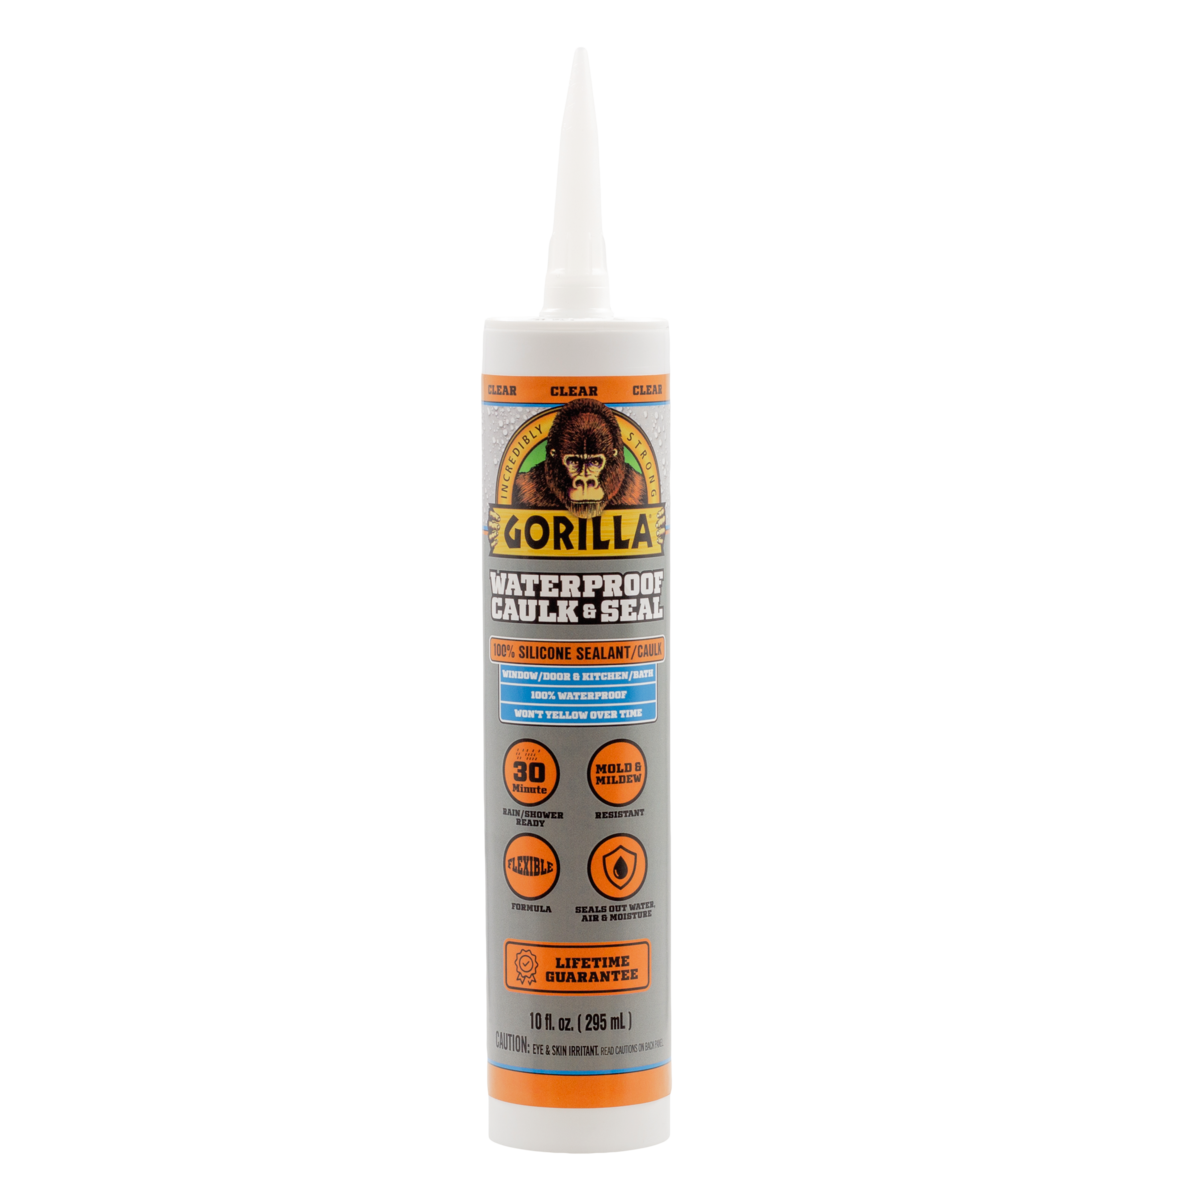 High Quality Neutral Silicon Glue Weatherproof Silicona Glass Glue Clear  Silicon Sealant for Aquarium - China Neutral Silicone Sealant Structural  Adhesive